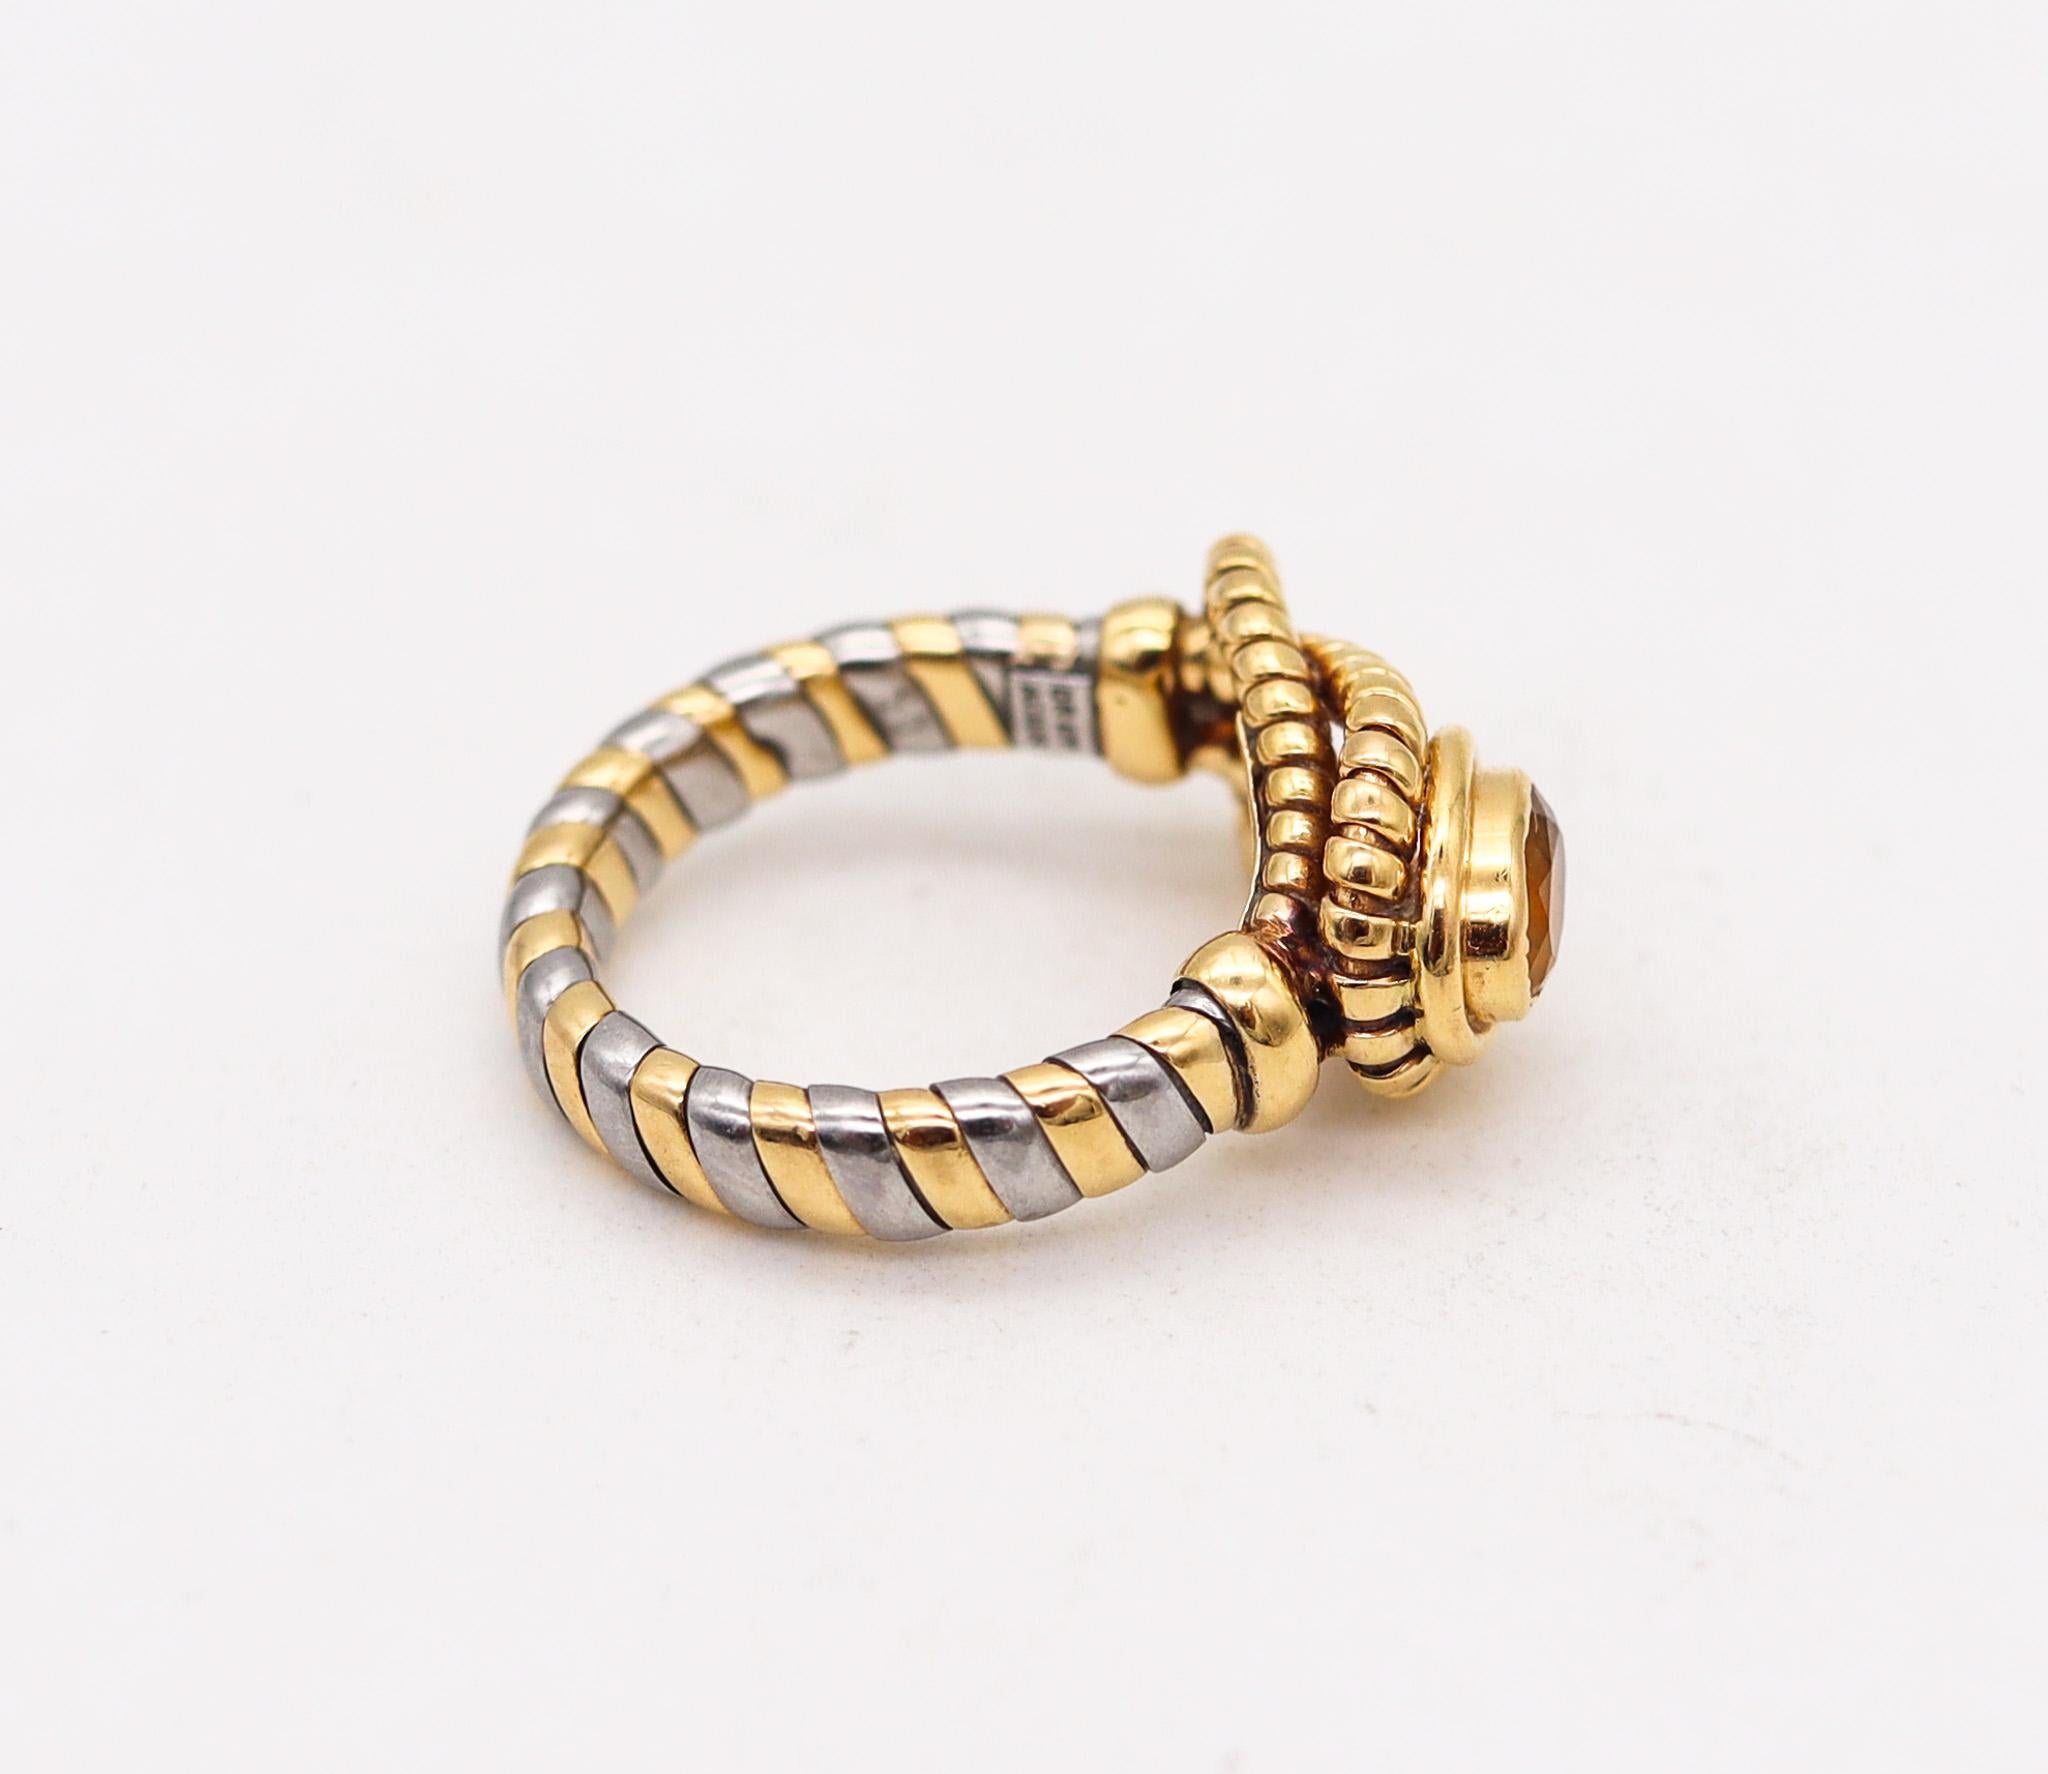 Modernist Cartier Tubogas Hercules Knot Ring in Stainless and 18 Karat Gold with Citrine